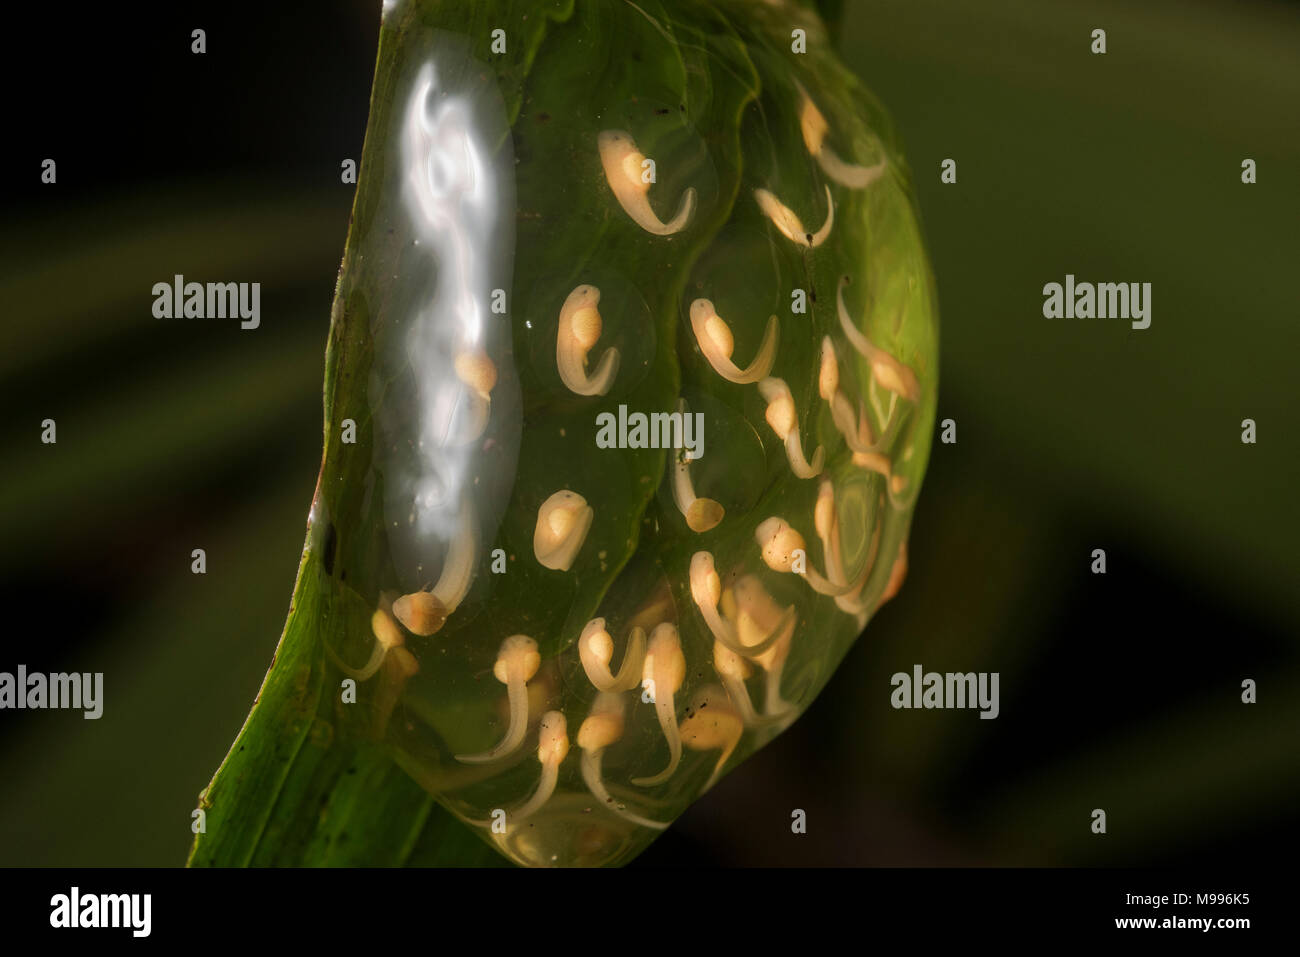 Overhanging a stream in Peru it is possible to find frogs' egg masses with tadpoles developing.  This egg mass belongs to a glassfrog (Centrolenidae). Stock Photo